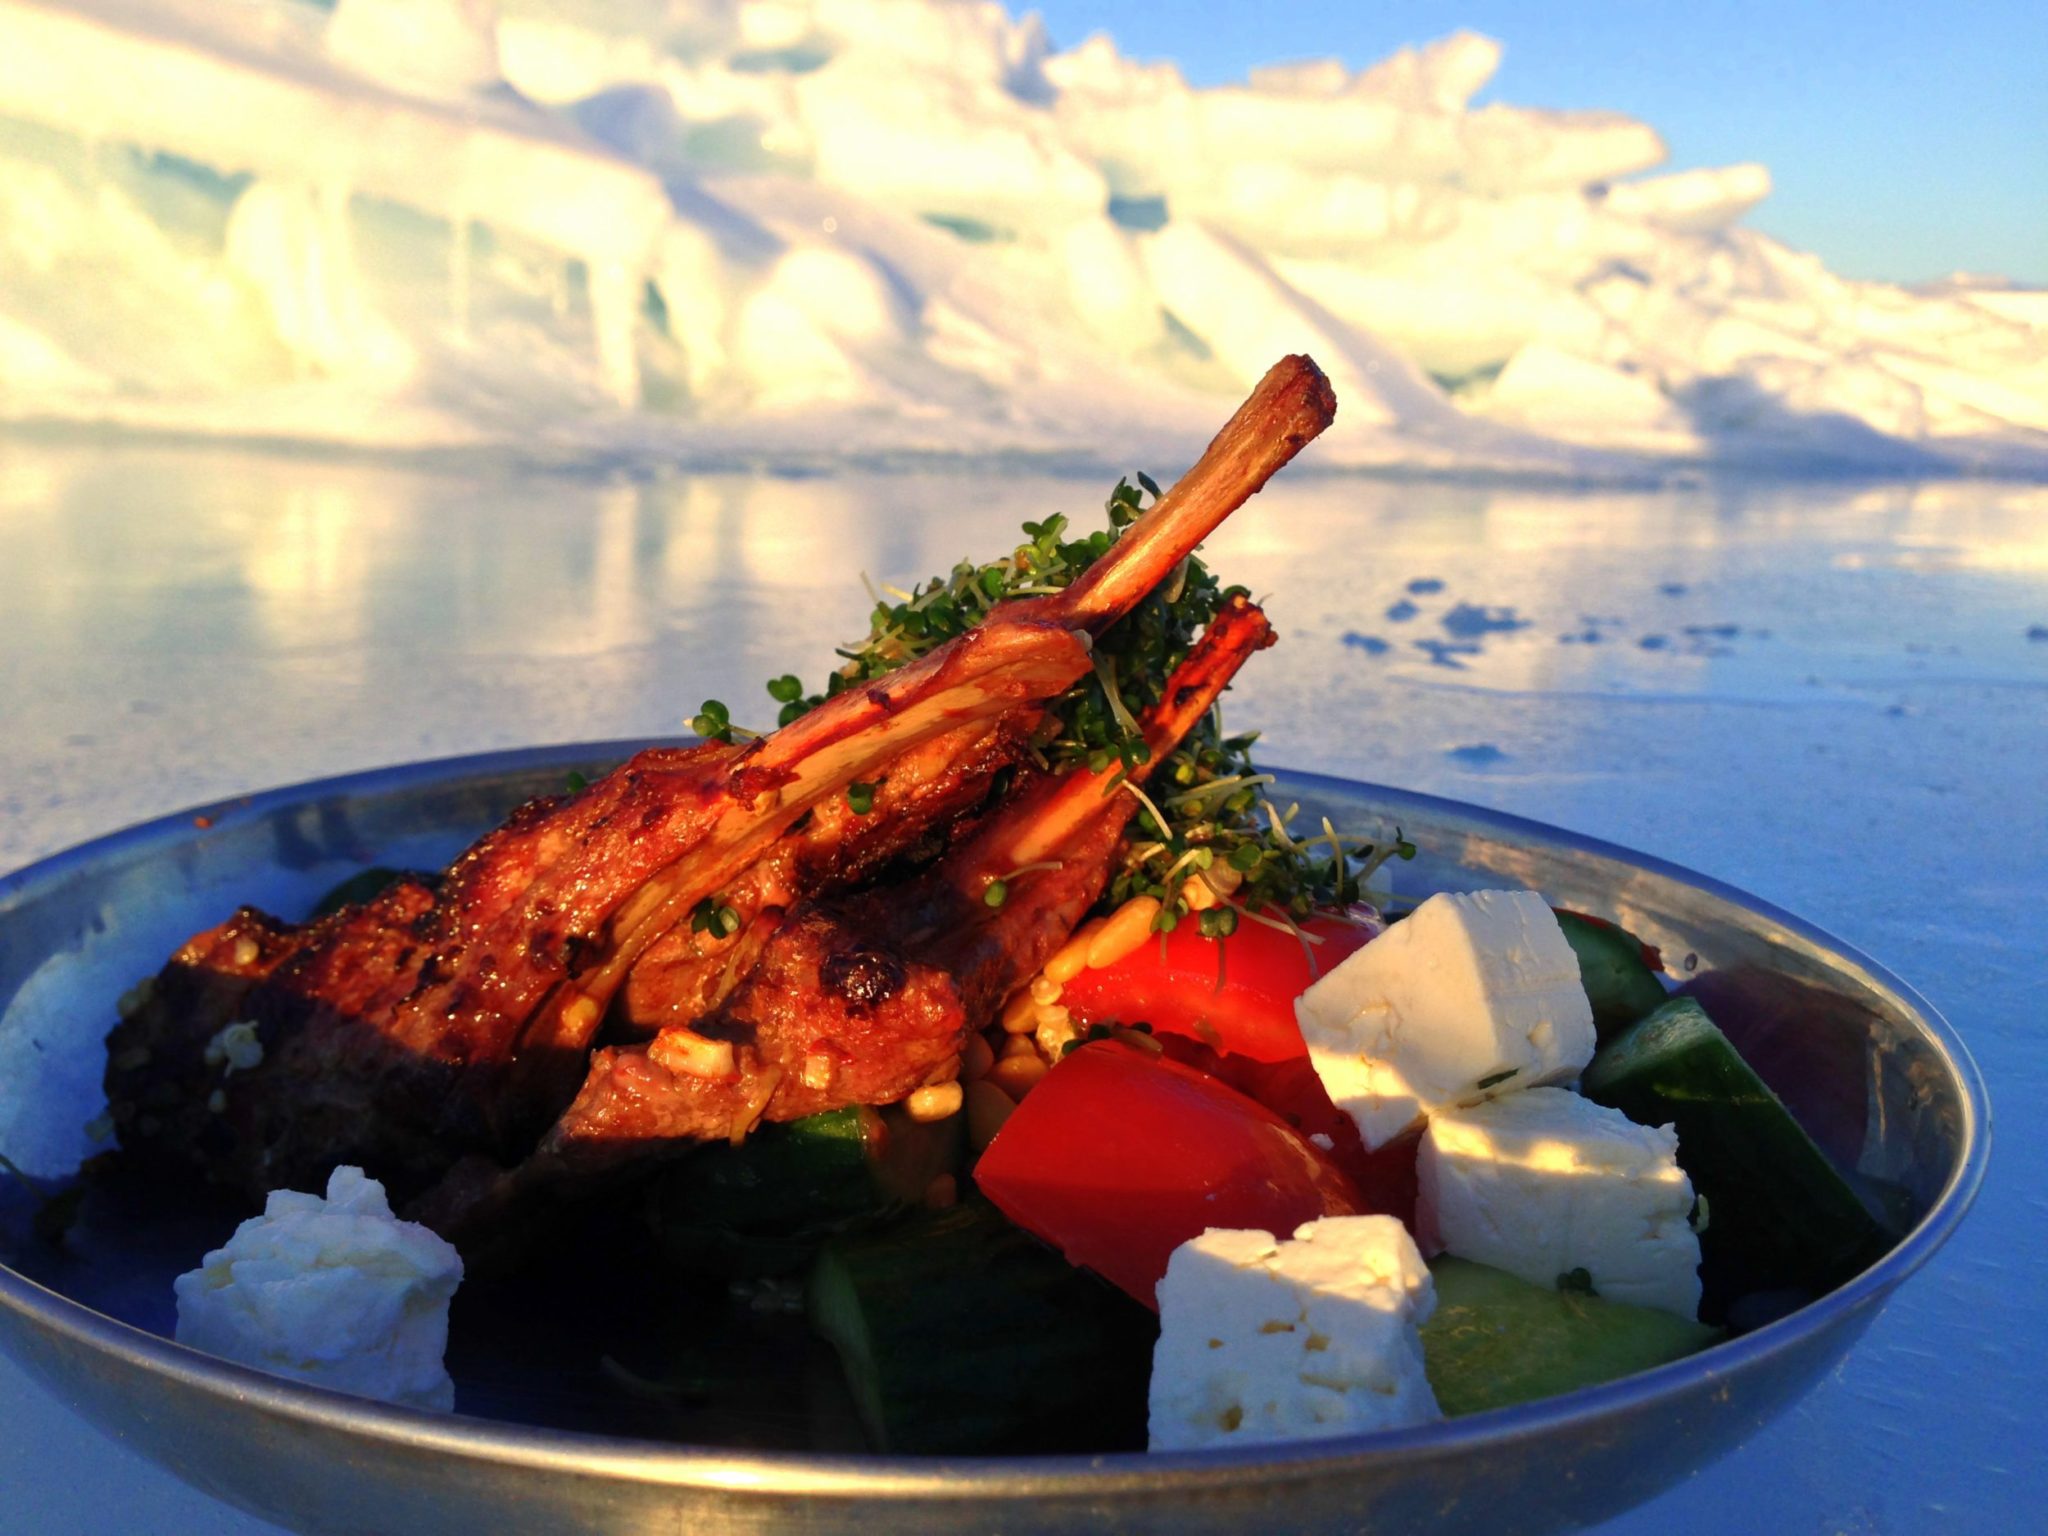 "Arctic Delights: Nutrient-Rich Seafood, Game Meat, and Berries Await in the Icy Wilderness"